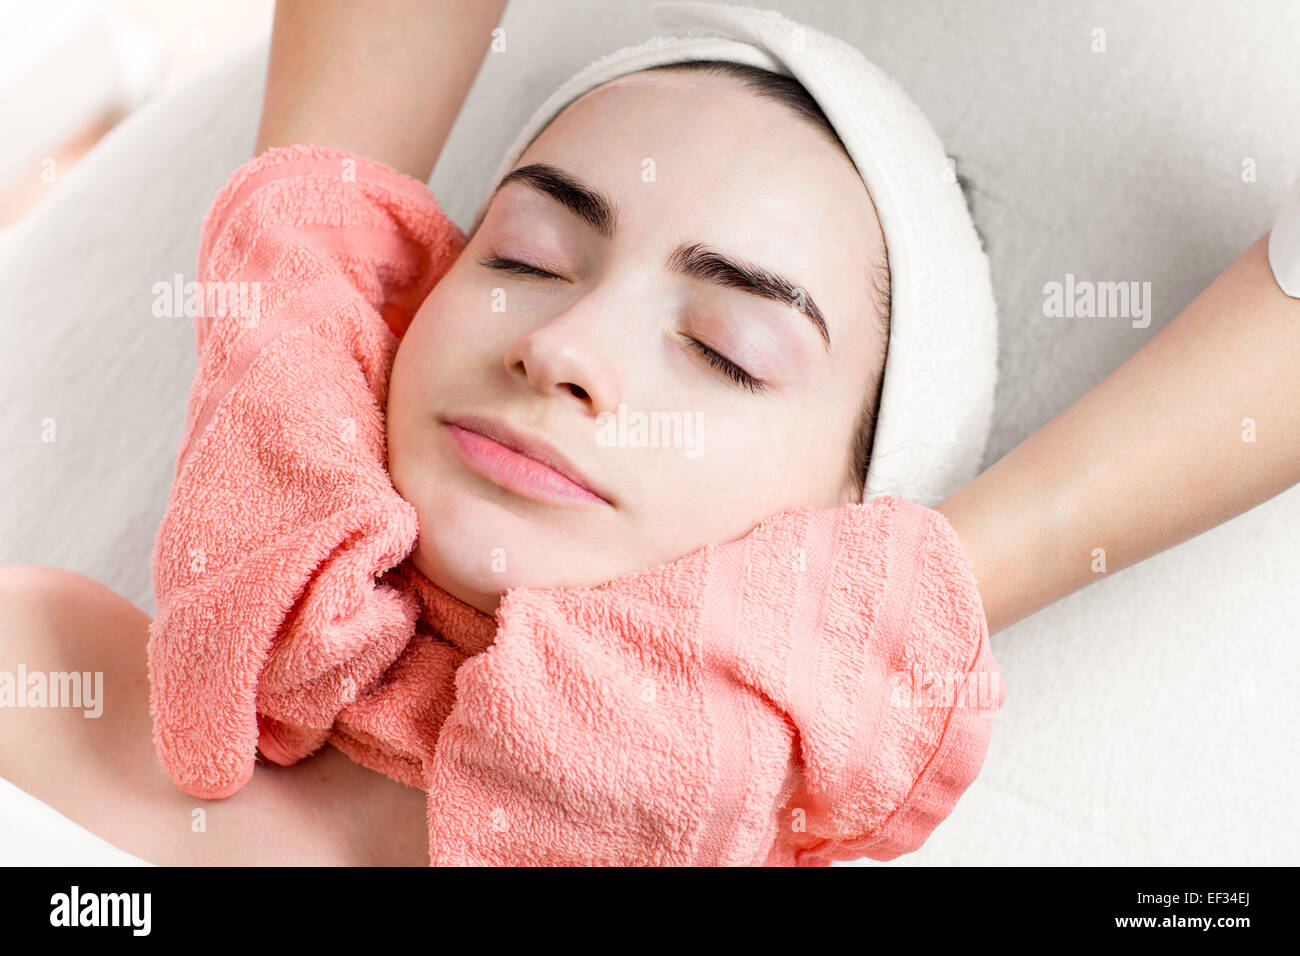 Young woman facial treatment or massage with towel Stock Photo